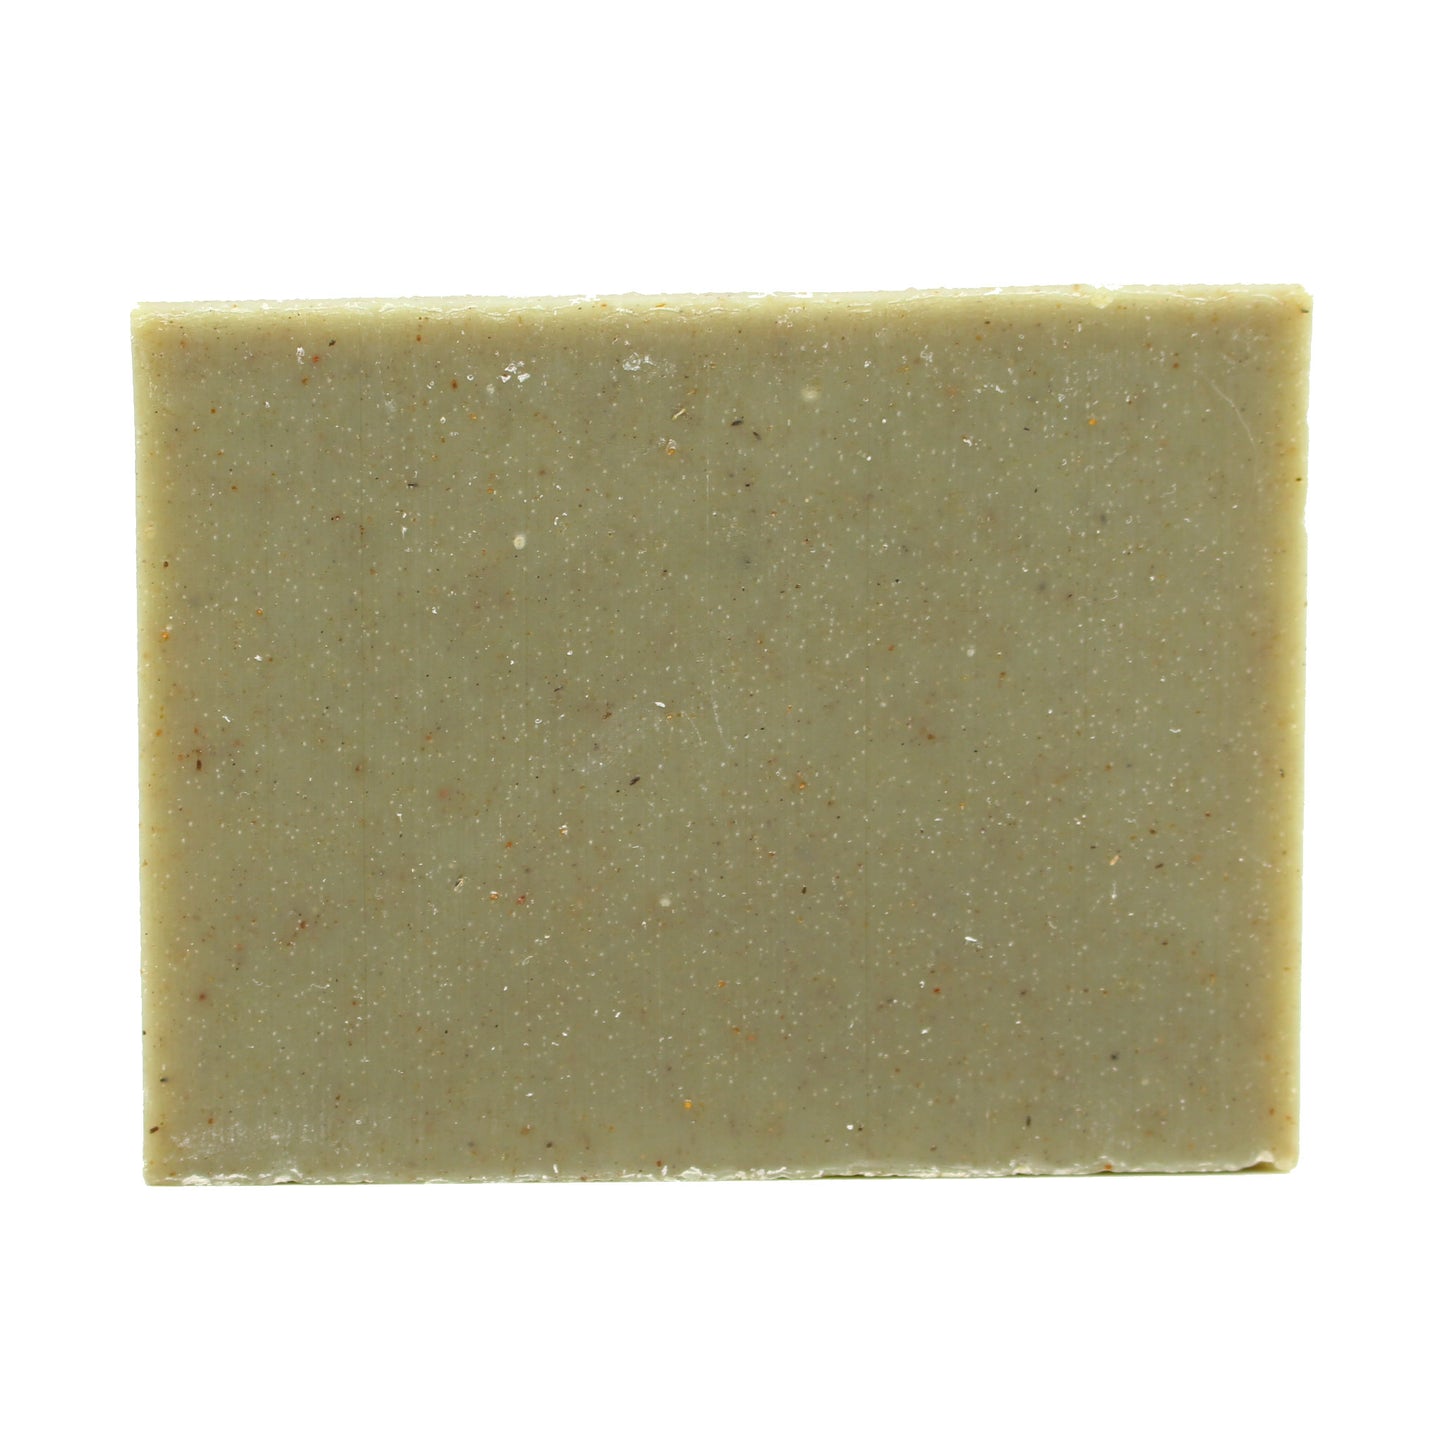 A naked bar of Grove cedar & pine essential oil and rhassoul clay organic bar soap from ground Soap.